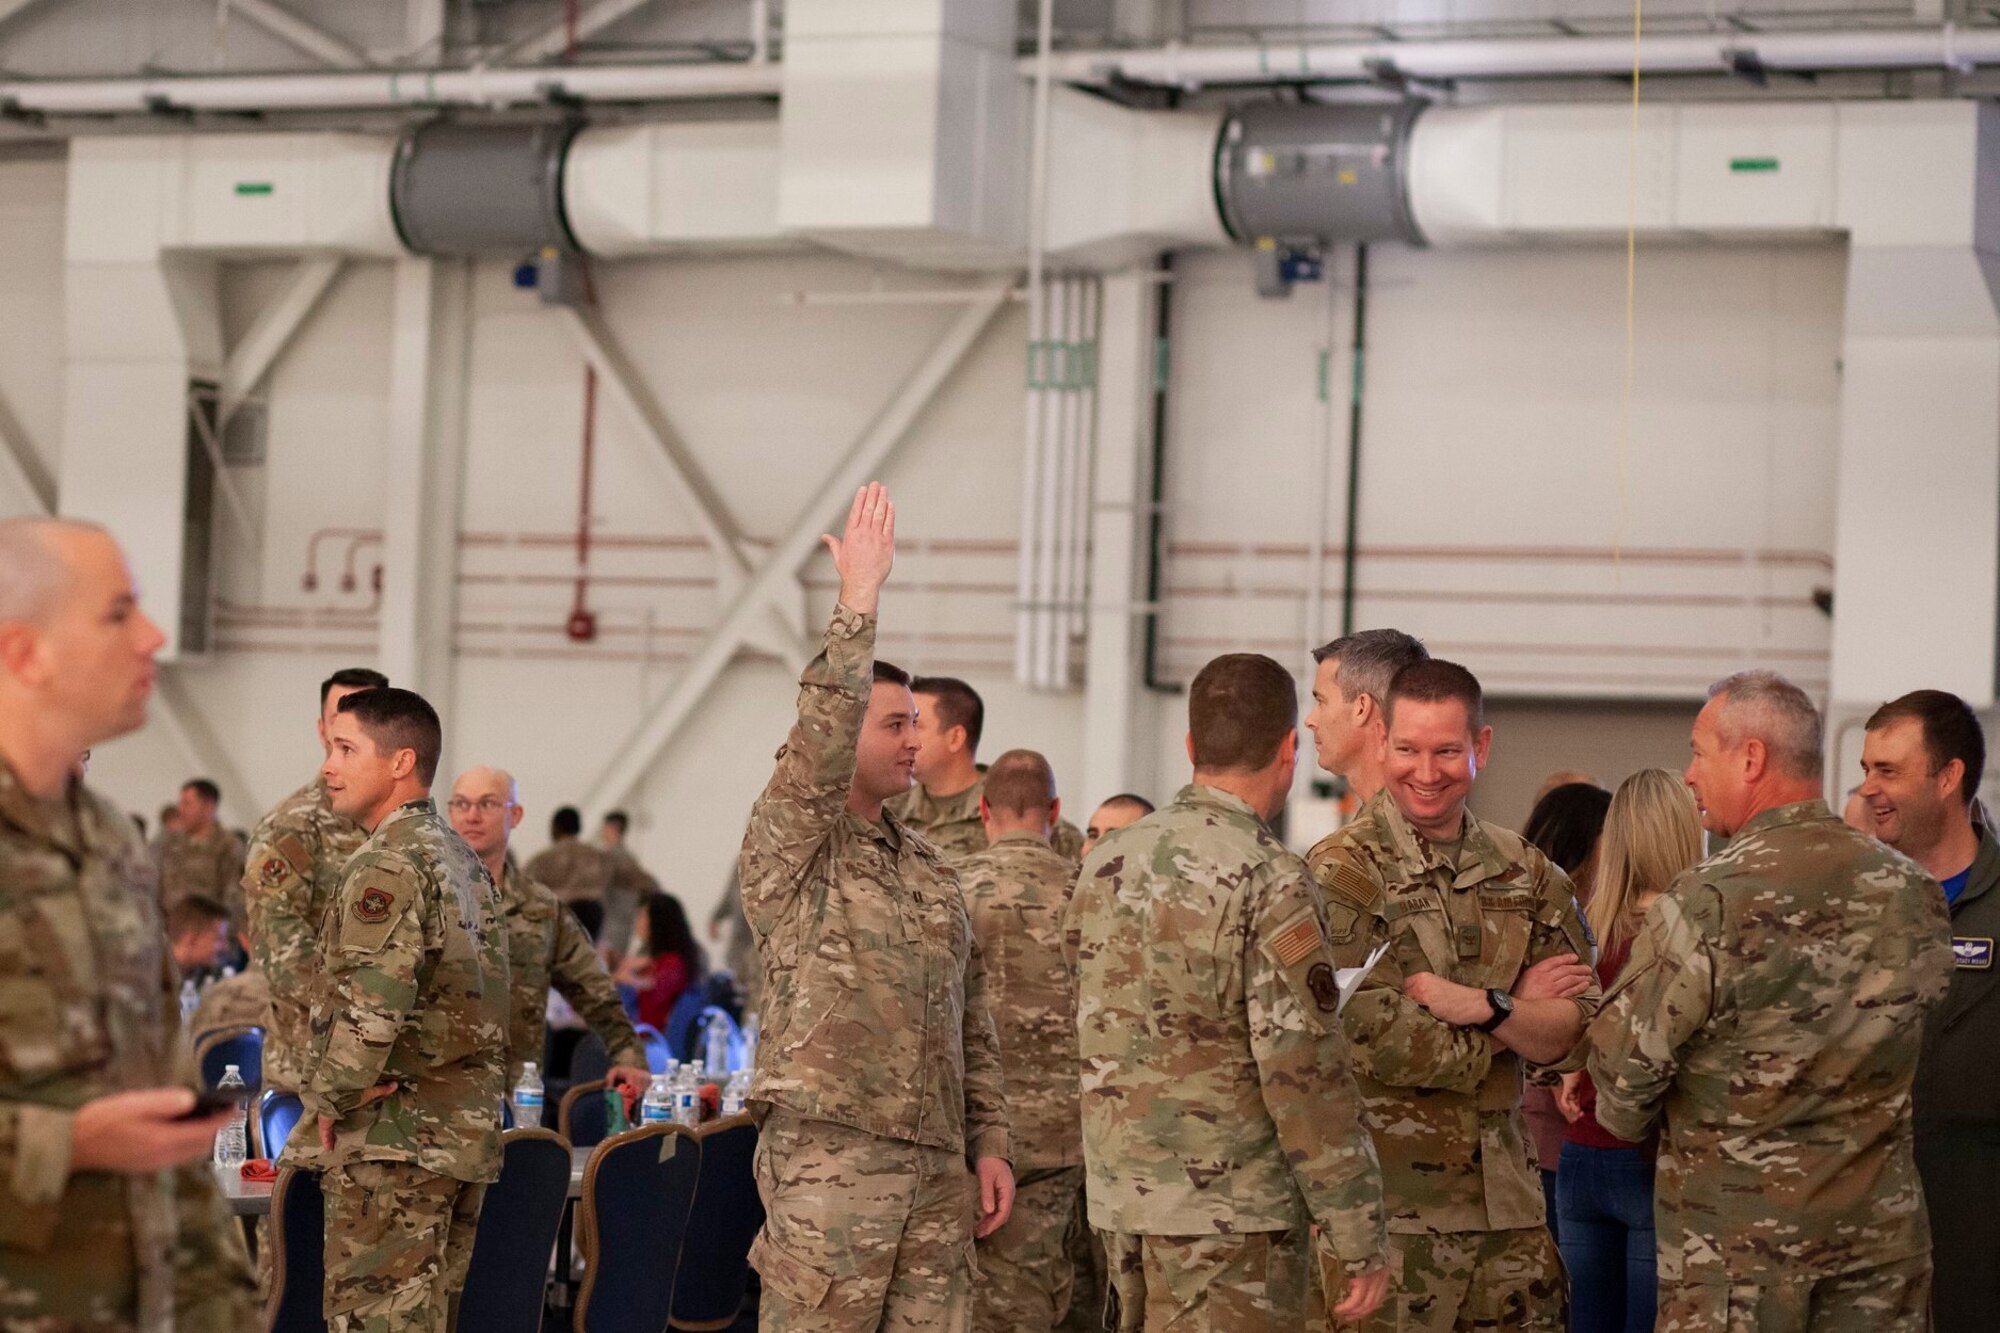 Maintainers from the 22nd Air Refueling Wing socialize during the Knucklebuster’s Award Ceremony Oct. 5, 2019, at McConnell Air Force Base, Kan. More than 600 Airmen from Team McConnell attended the event. (U.S. Air Force photo by 2nd Lt. Kaitlyn Danner)